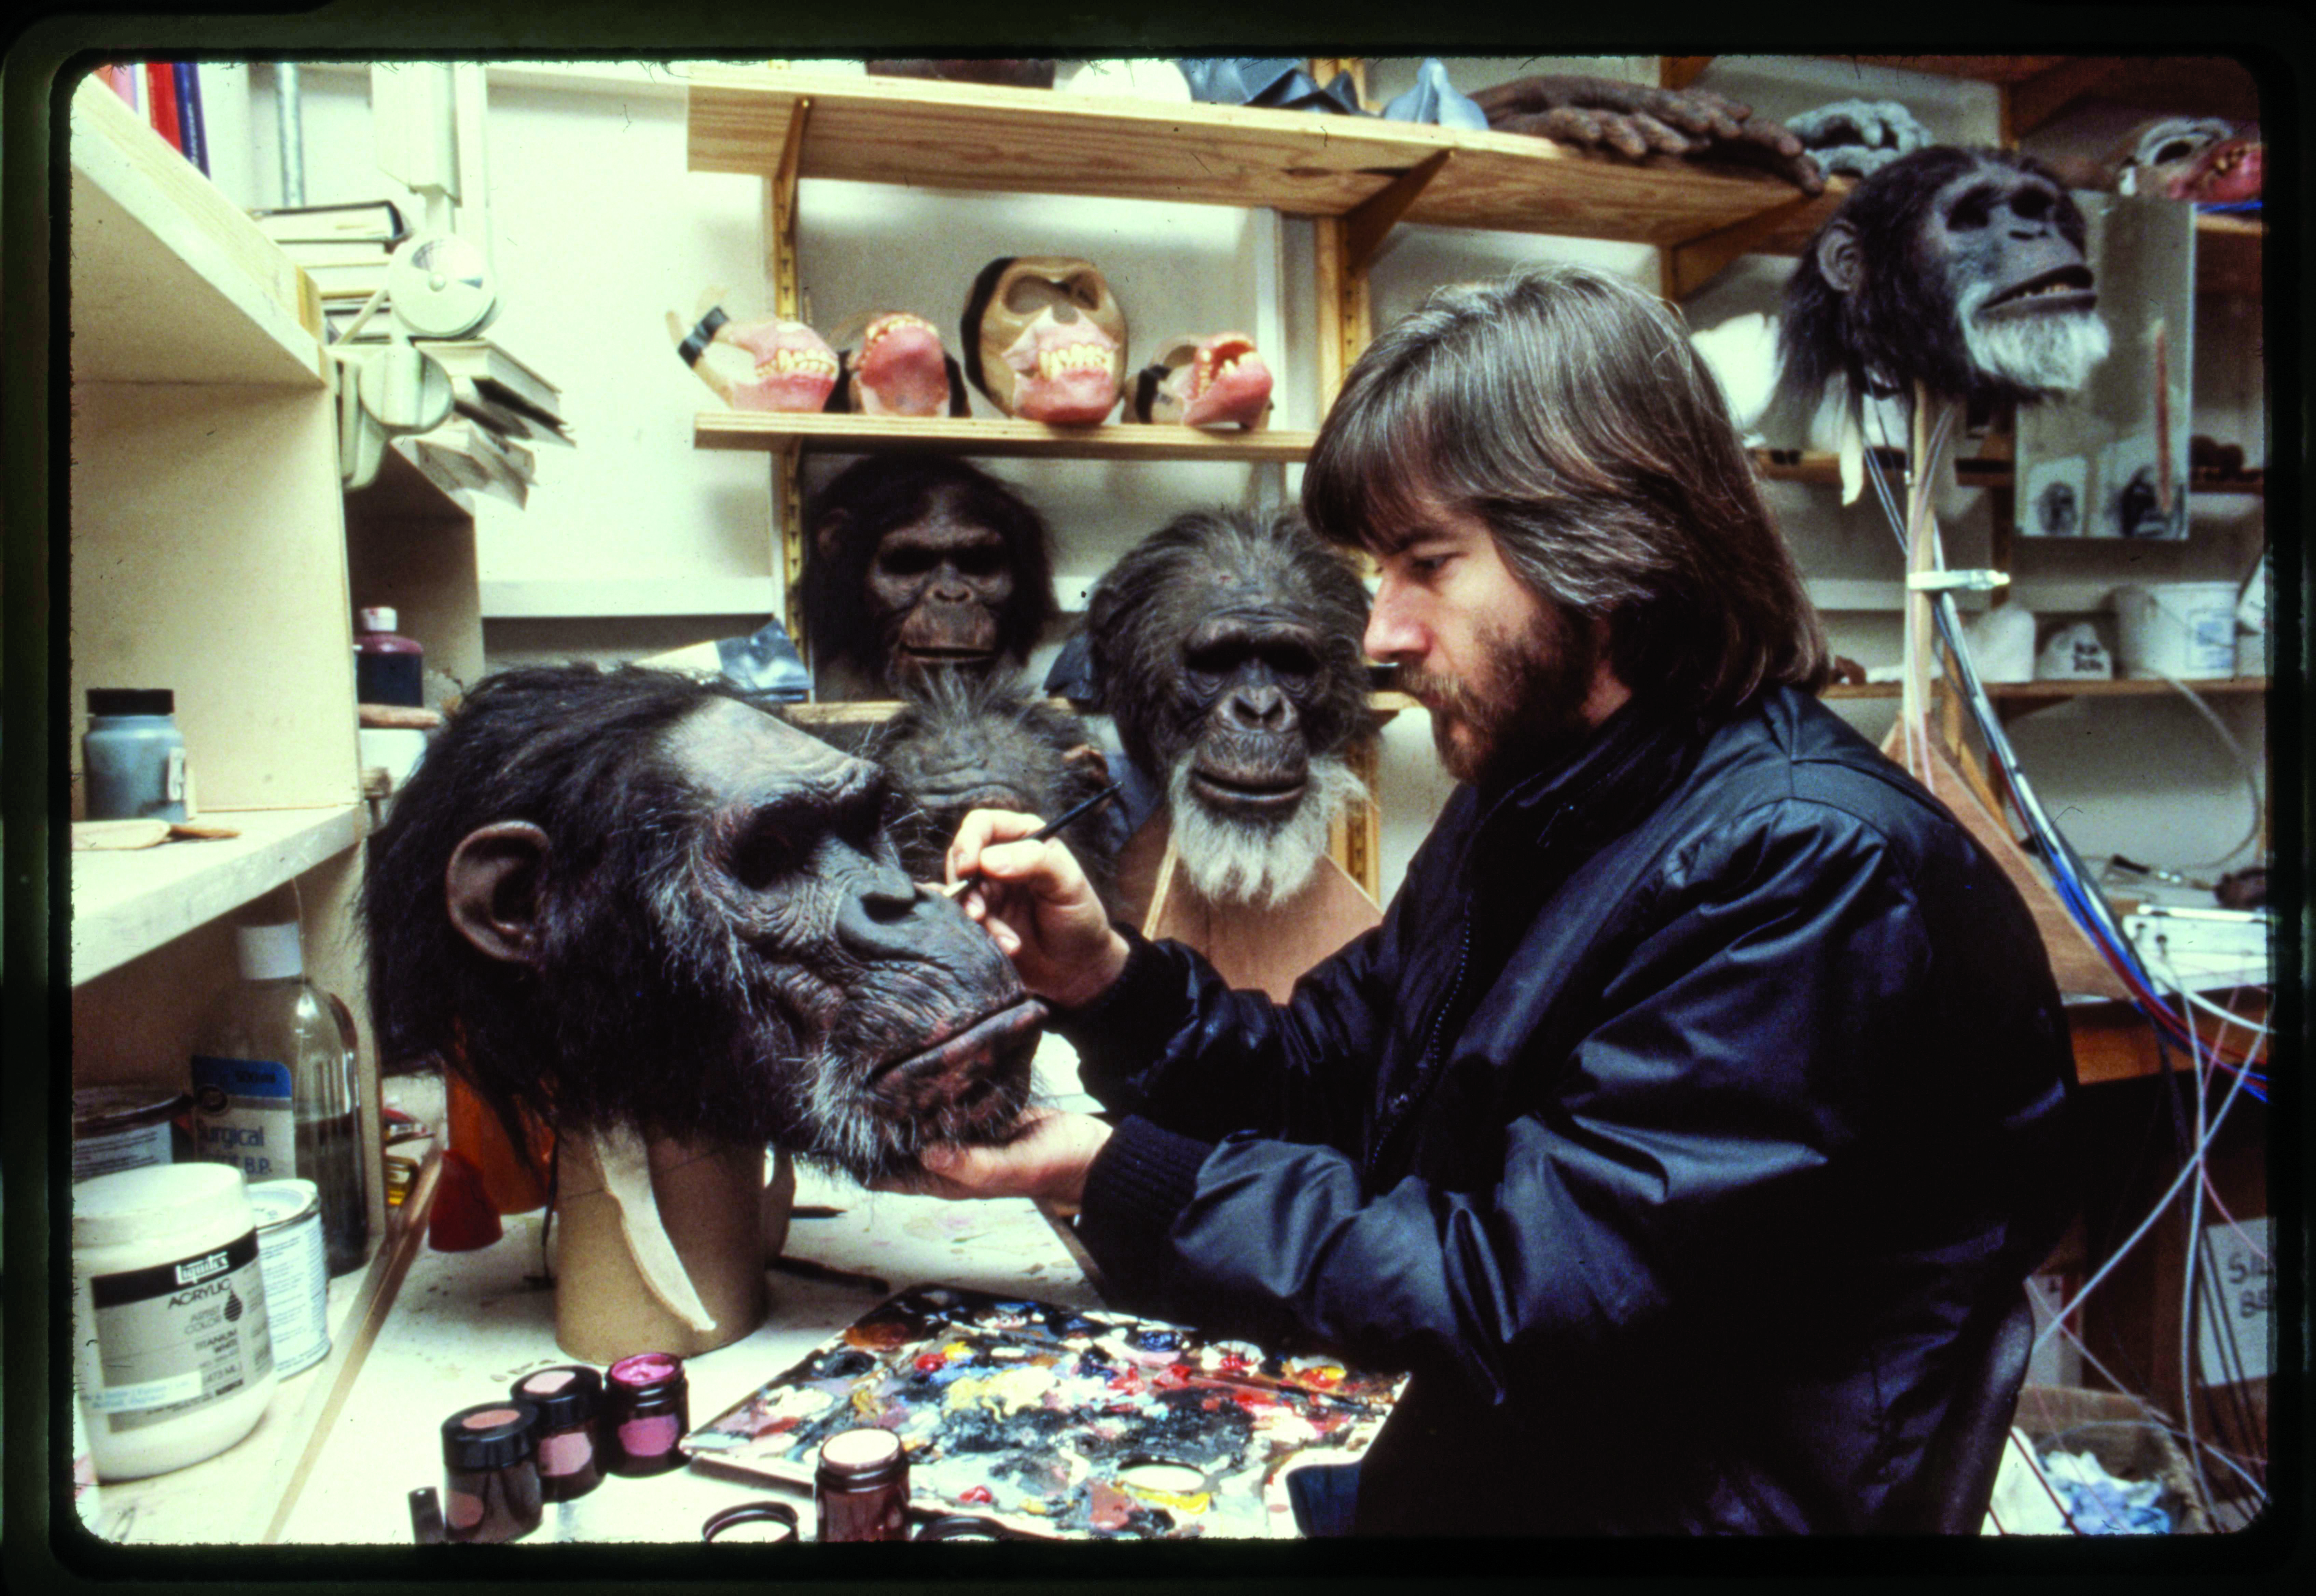 Rick Baker in his workshop on Stage 5 at Elstree Studios, touching up the paint on White Eyes, from the movie “Greystoke: The Legend of Tarzan, Lord of the Apes.”